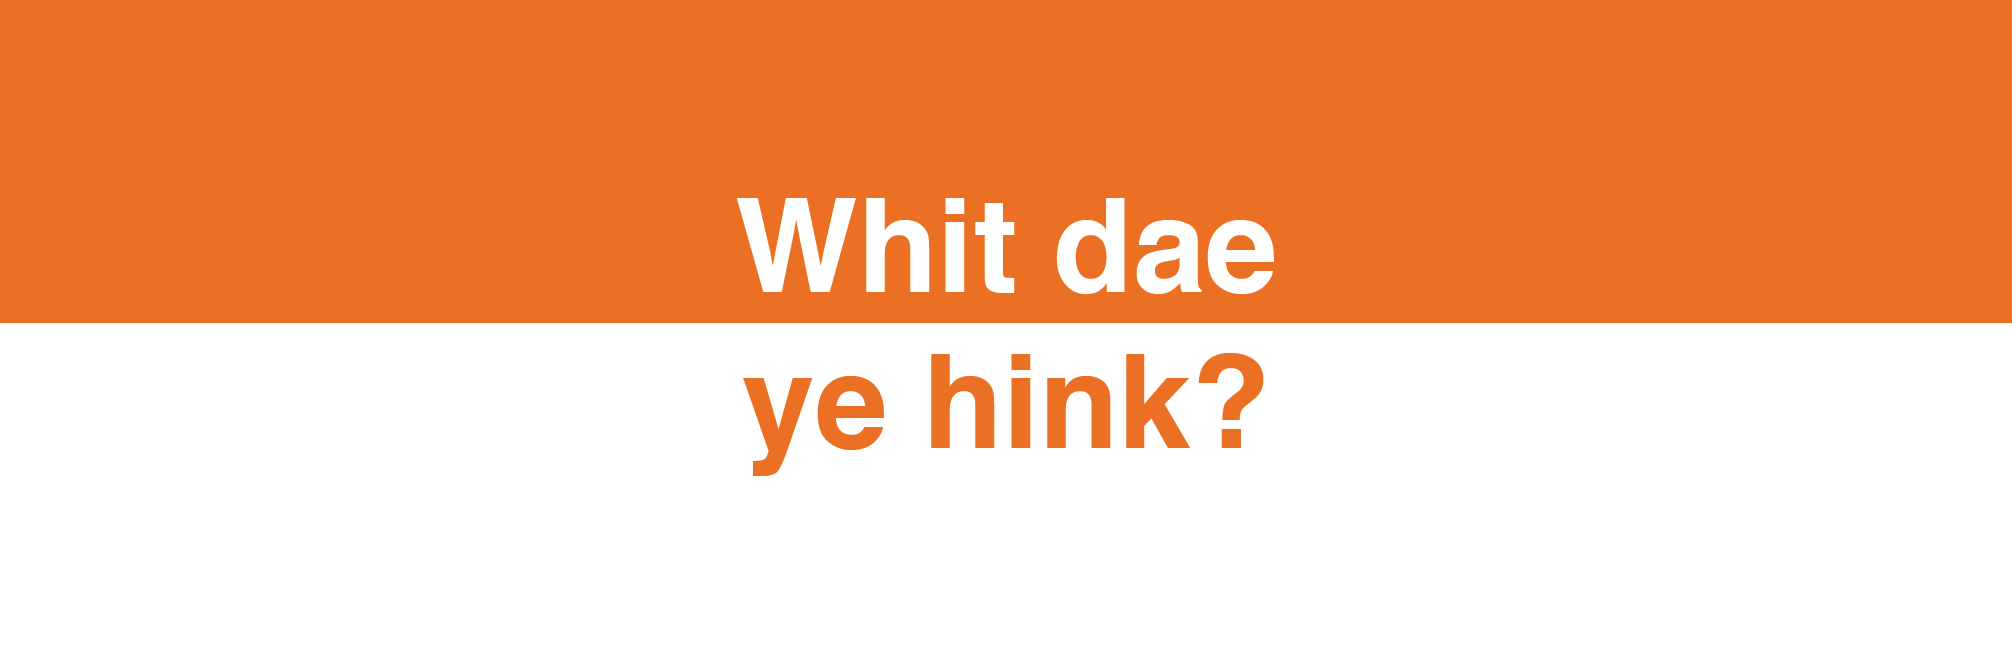 Featured image for “Whit dae ye hink”